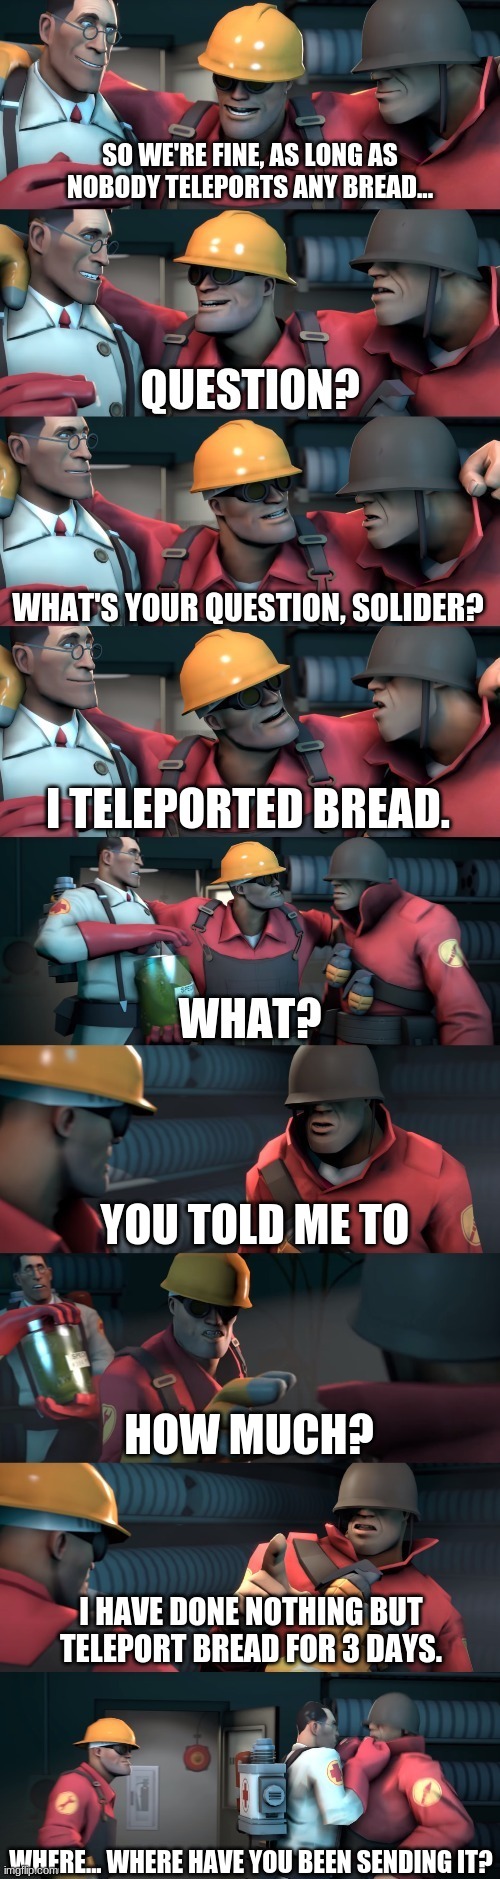 Just a new template. | SO WE'RE FINE, AS LONG AS NOBODY TELEPORTS ANY BREAD... WHAT'S YOUR QUESTION, SOLIDER? I TELEPORTED BREAD. YOU TOLD ME TO; HOW MUCH? I HAVE DONE NOTHING BUT TELEPORT BREAD FOR 3 DAYS. WHERE... WHERE HAVE YOU BEEN SENDING IT? | image tagged in tf2 teleport bread meme english | made w/ Imgflip meme maker